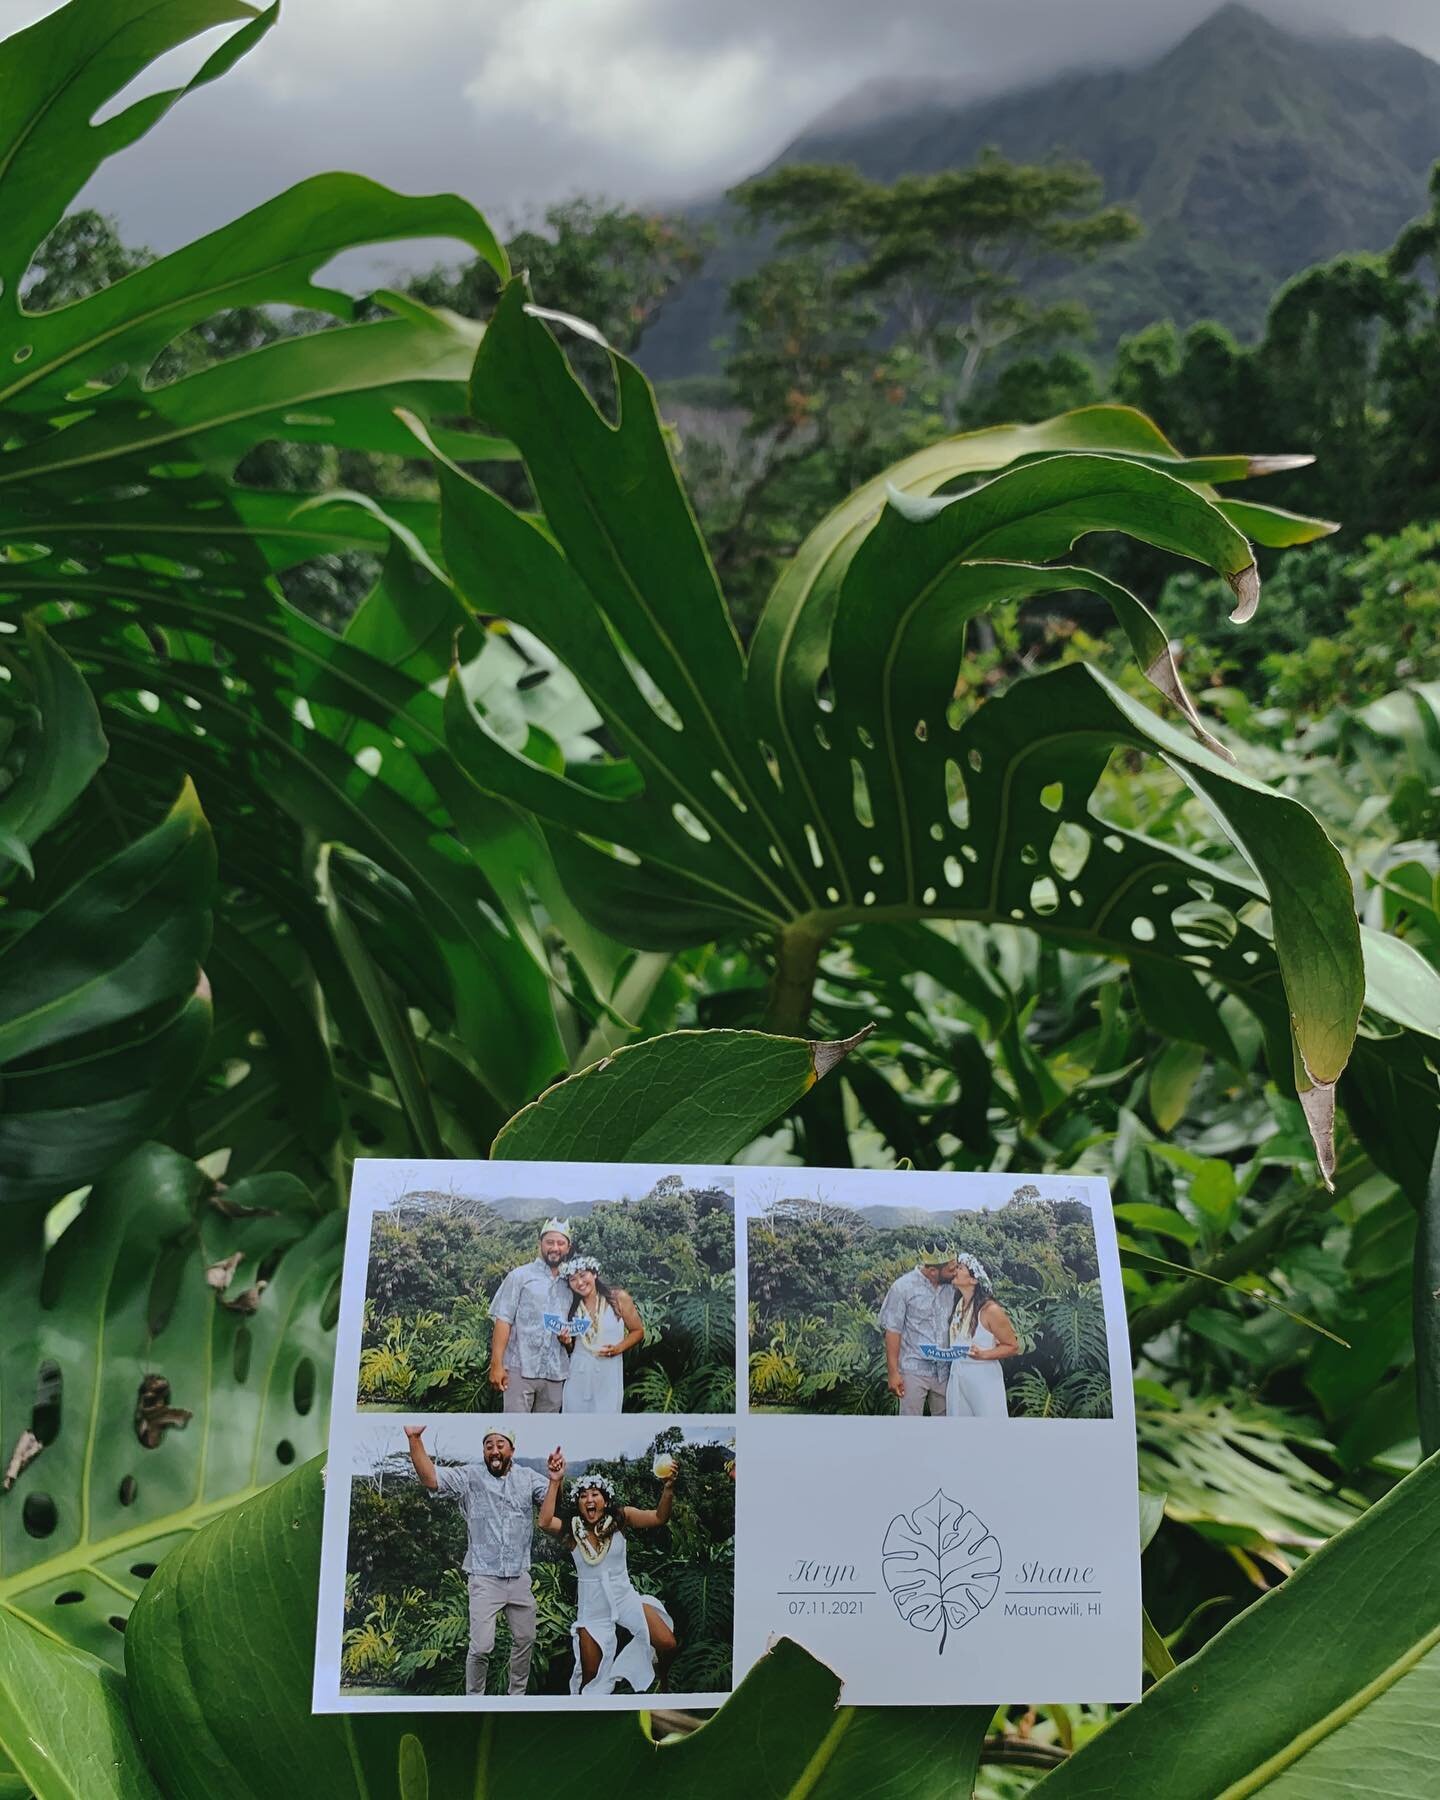 We love using nature as the backdrop.  Mahalo to Kryn and Shane for having us be a part of their special day!